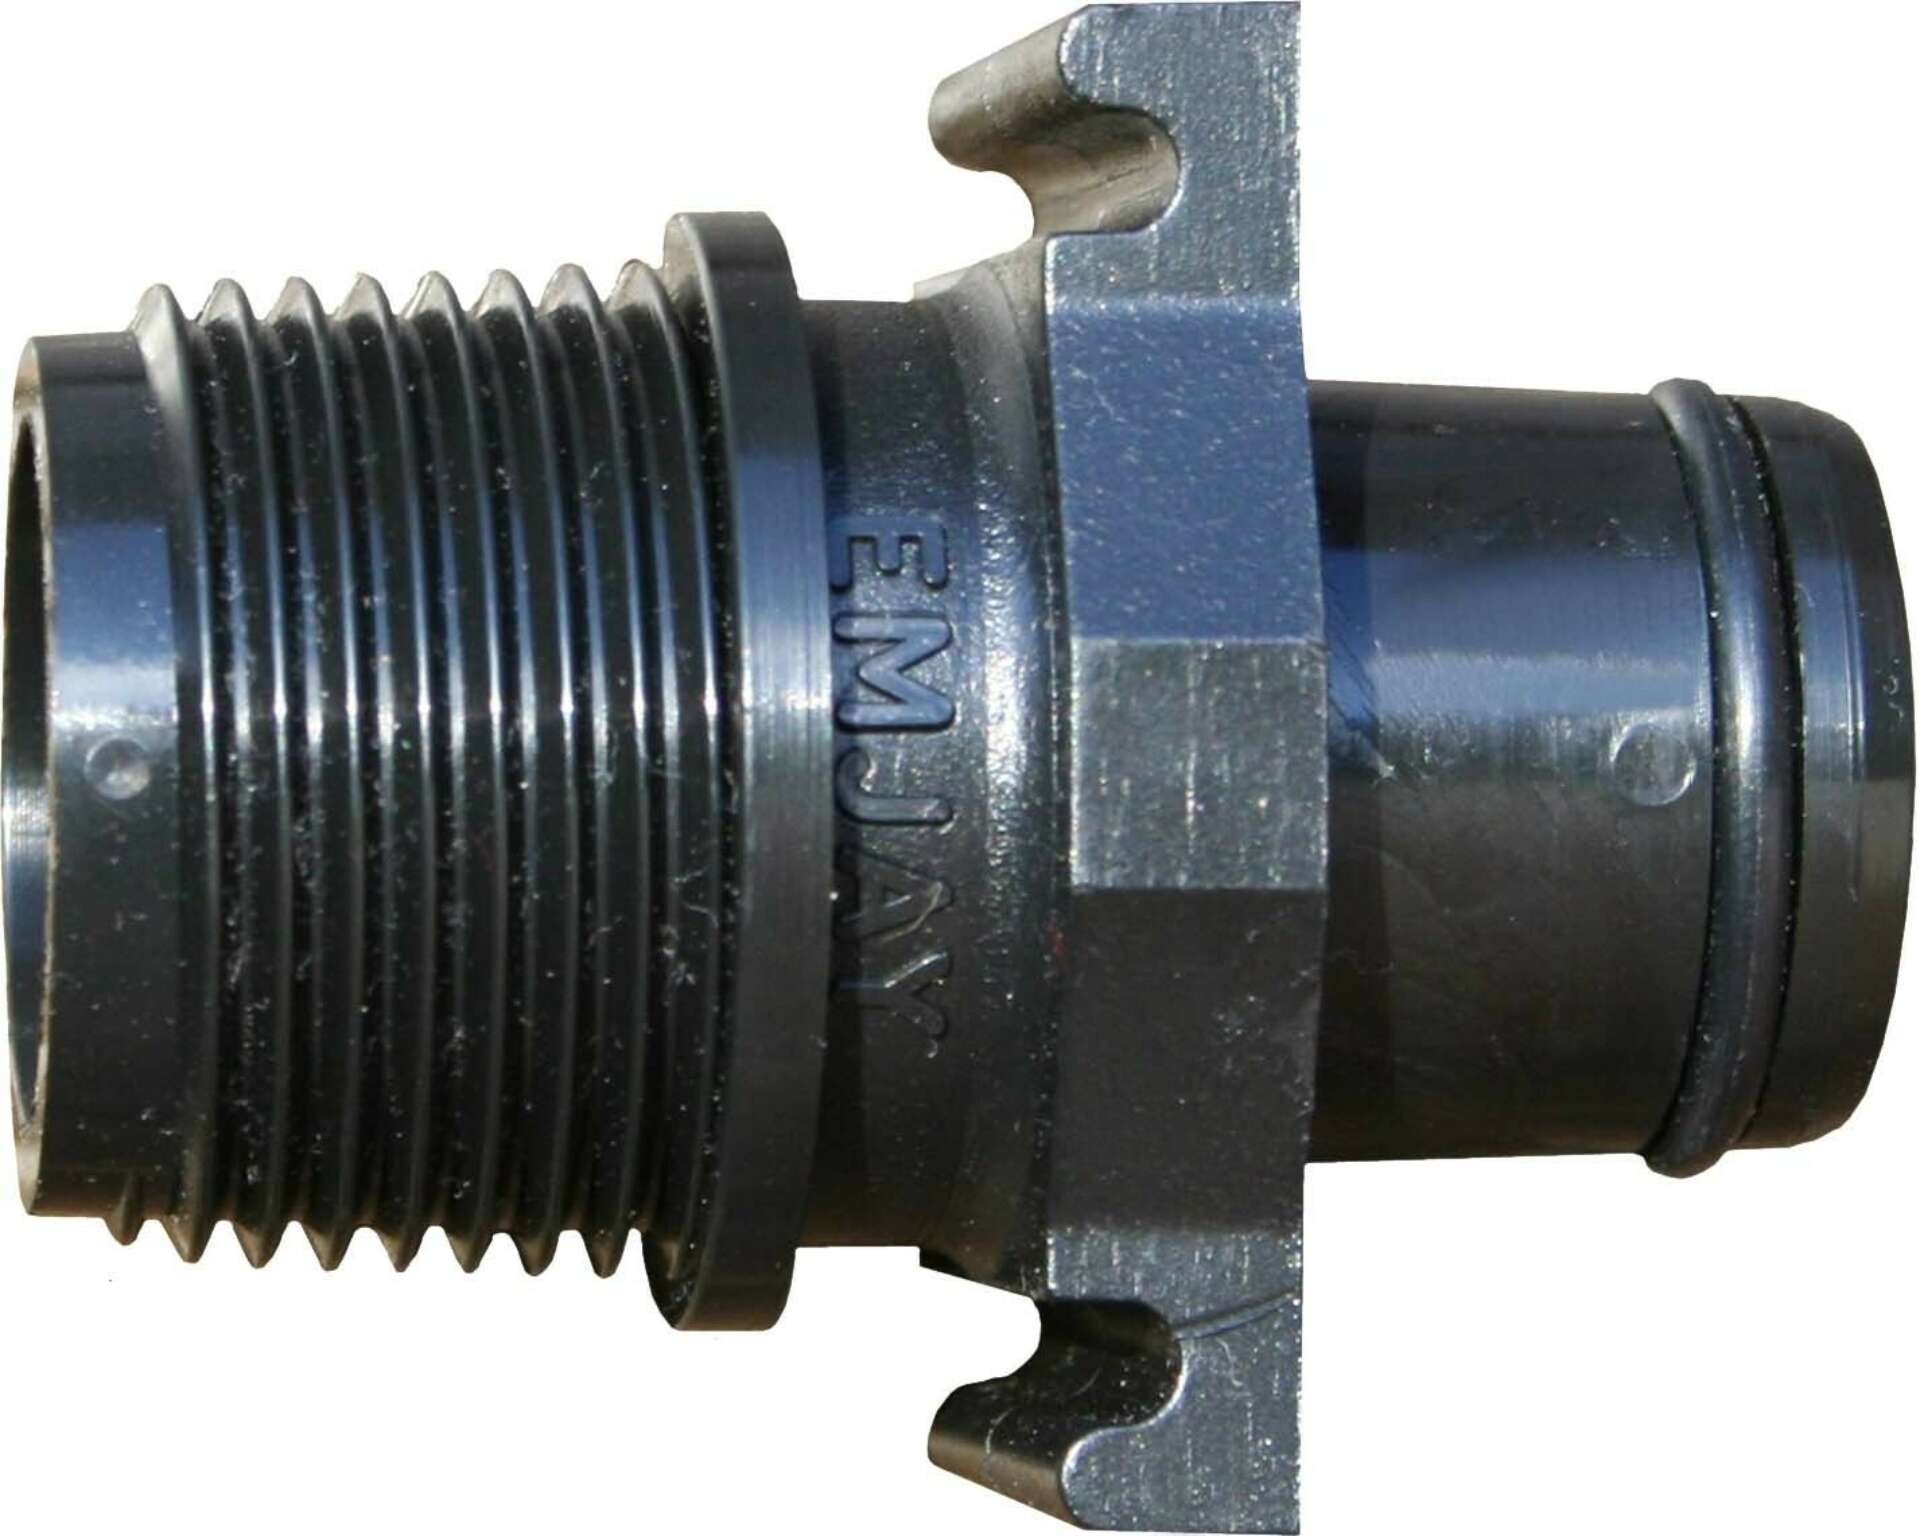 Nelson Manifold Inlet 1" BSP X COUPLING